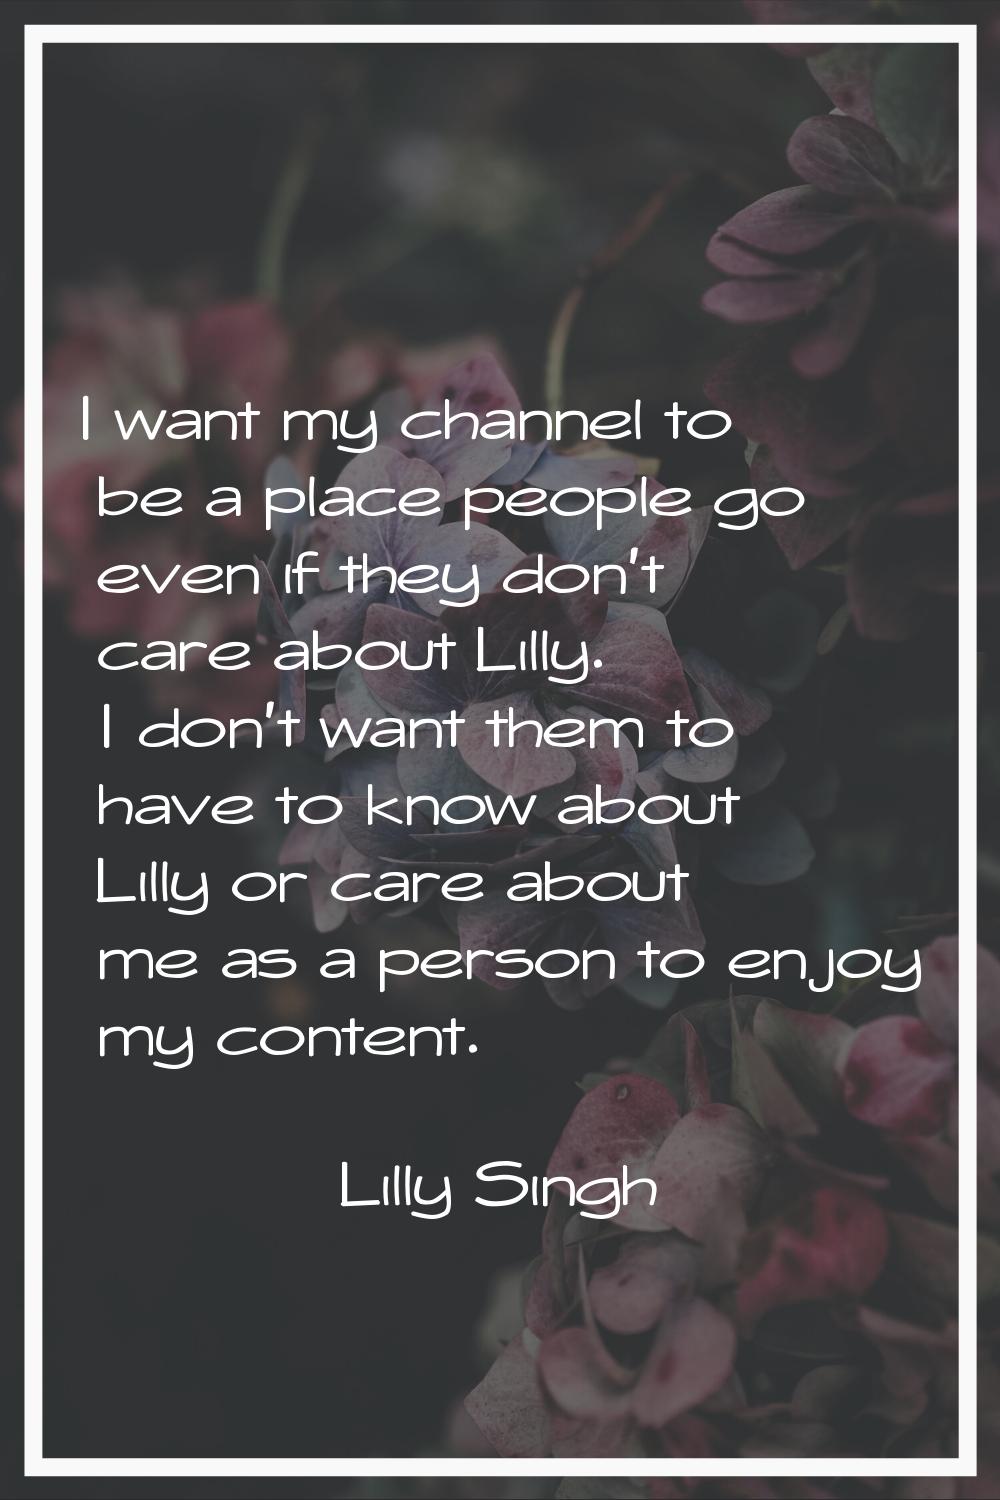 I want my channel to be a place people go even if they don't care about Lilly. I don't want them to